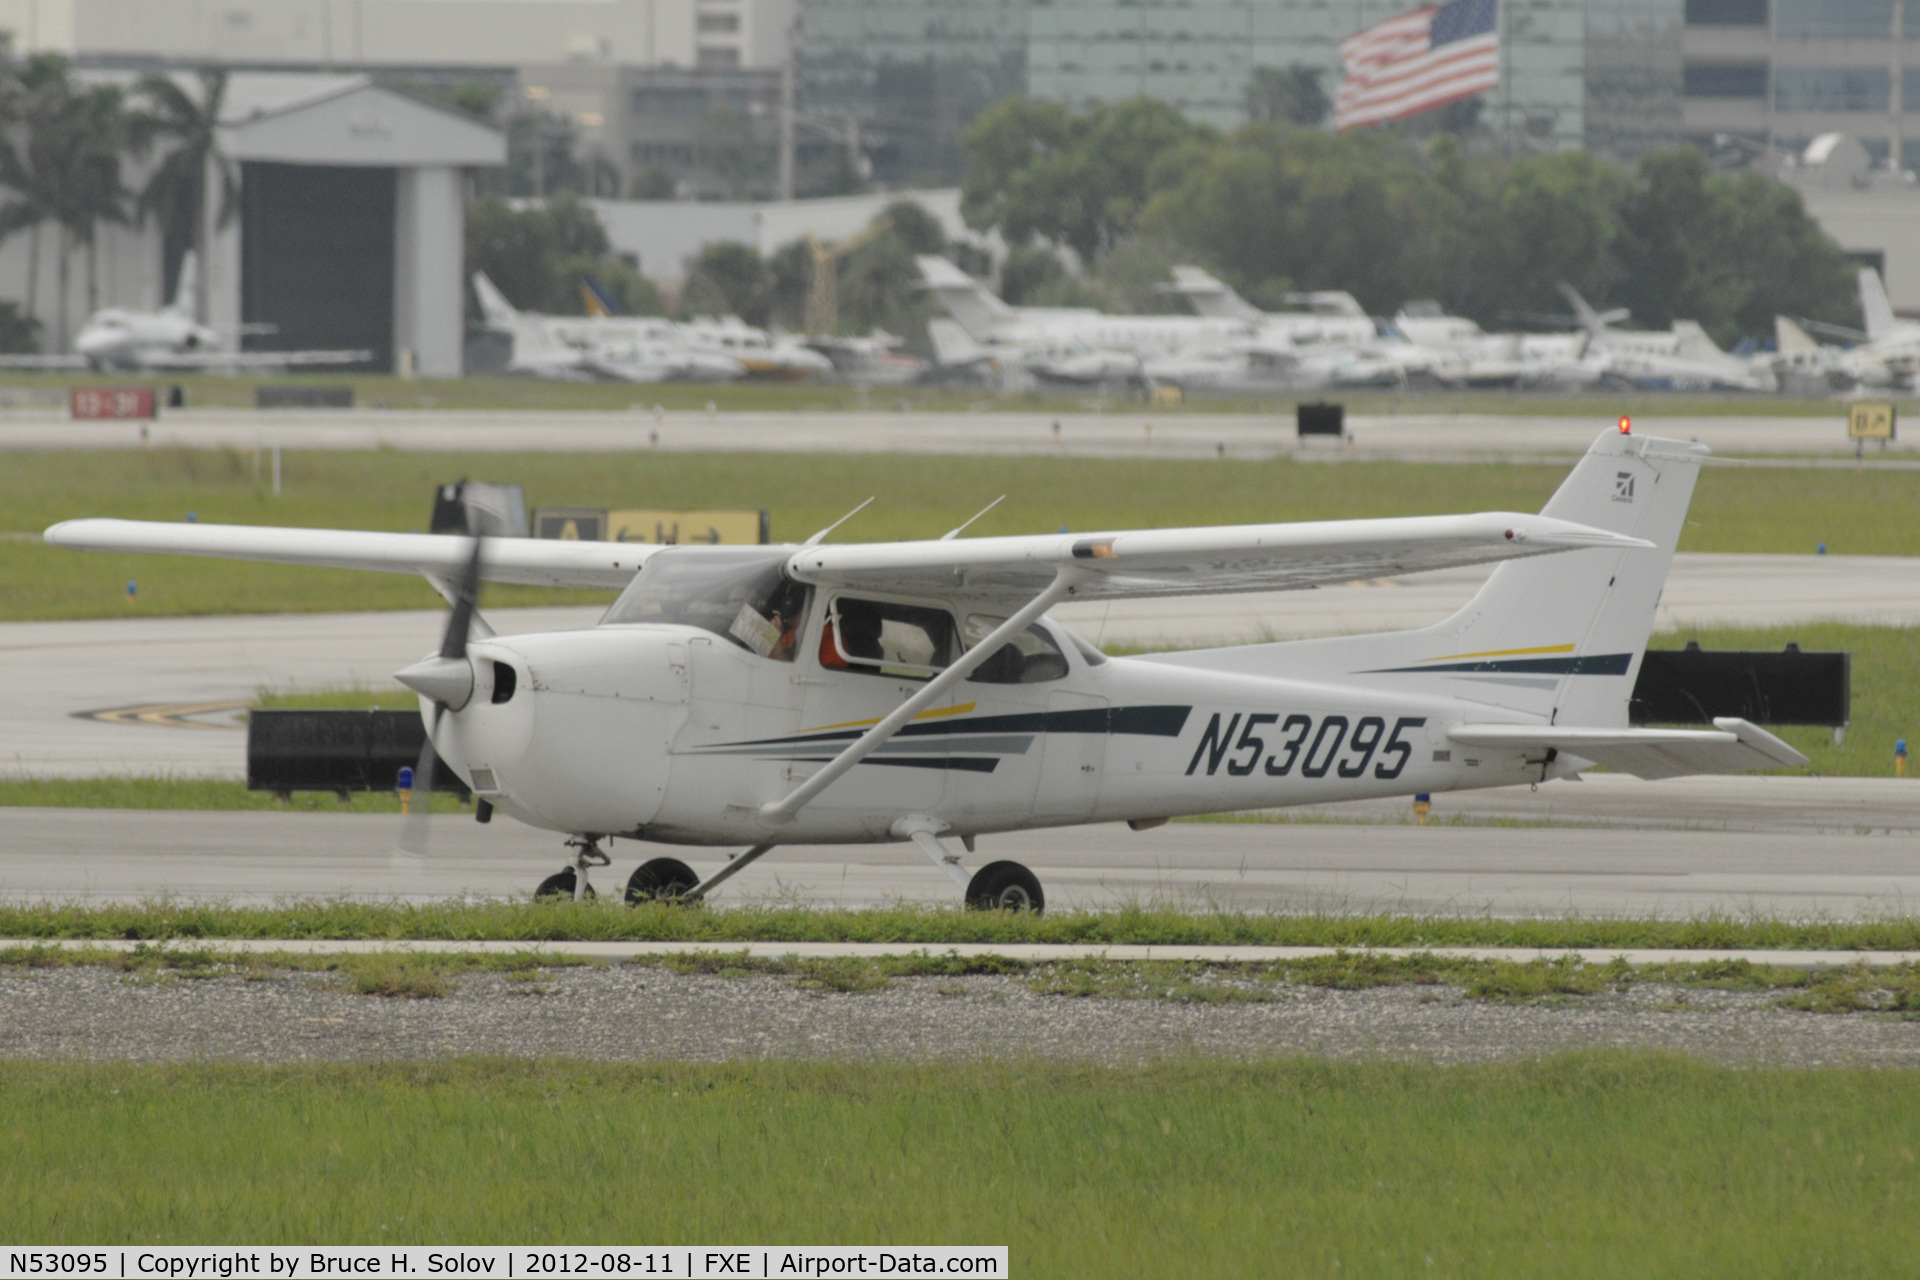 N53095, 2002 Cessna 172S C/N 172S9275, finishing run-up and in line for takeoff on runway 8